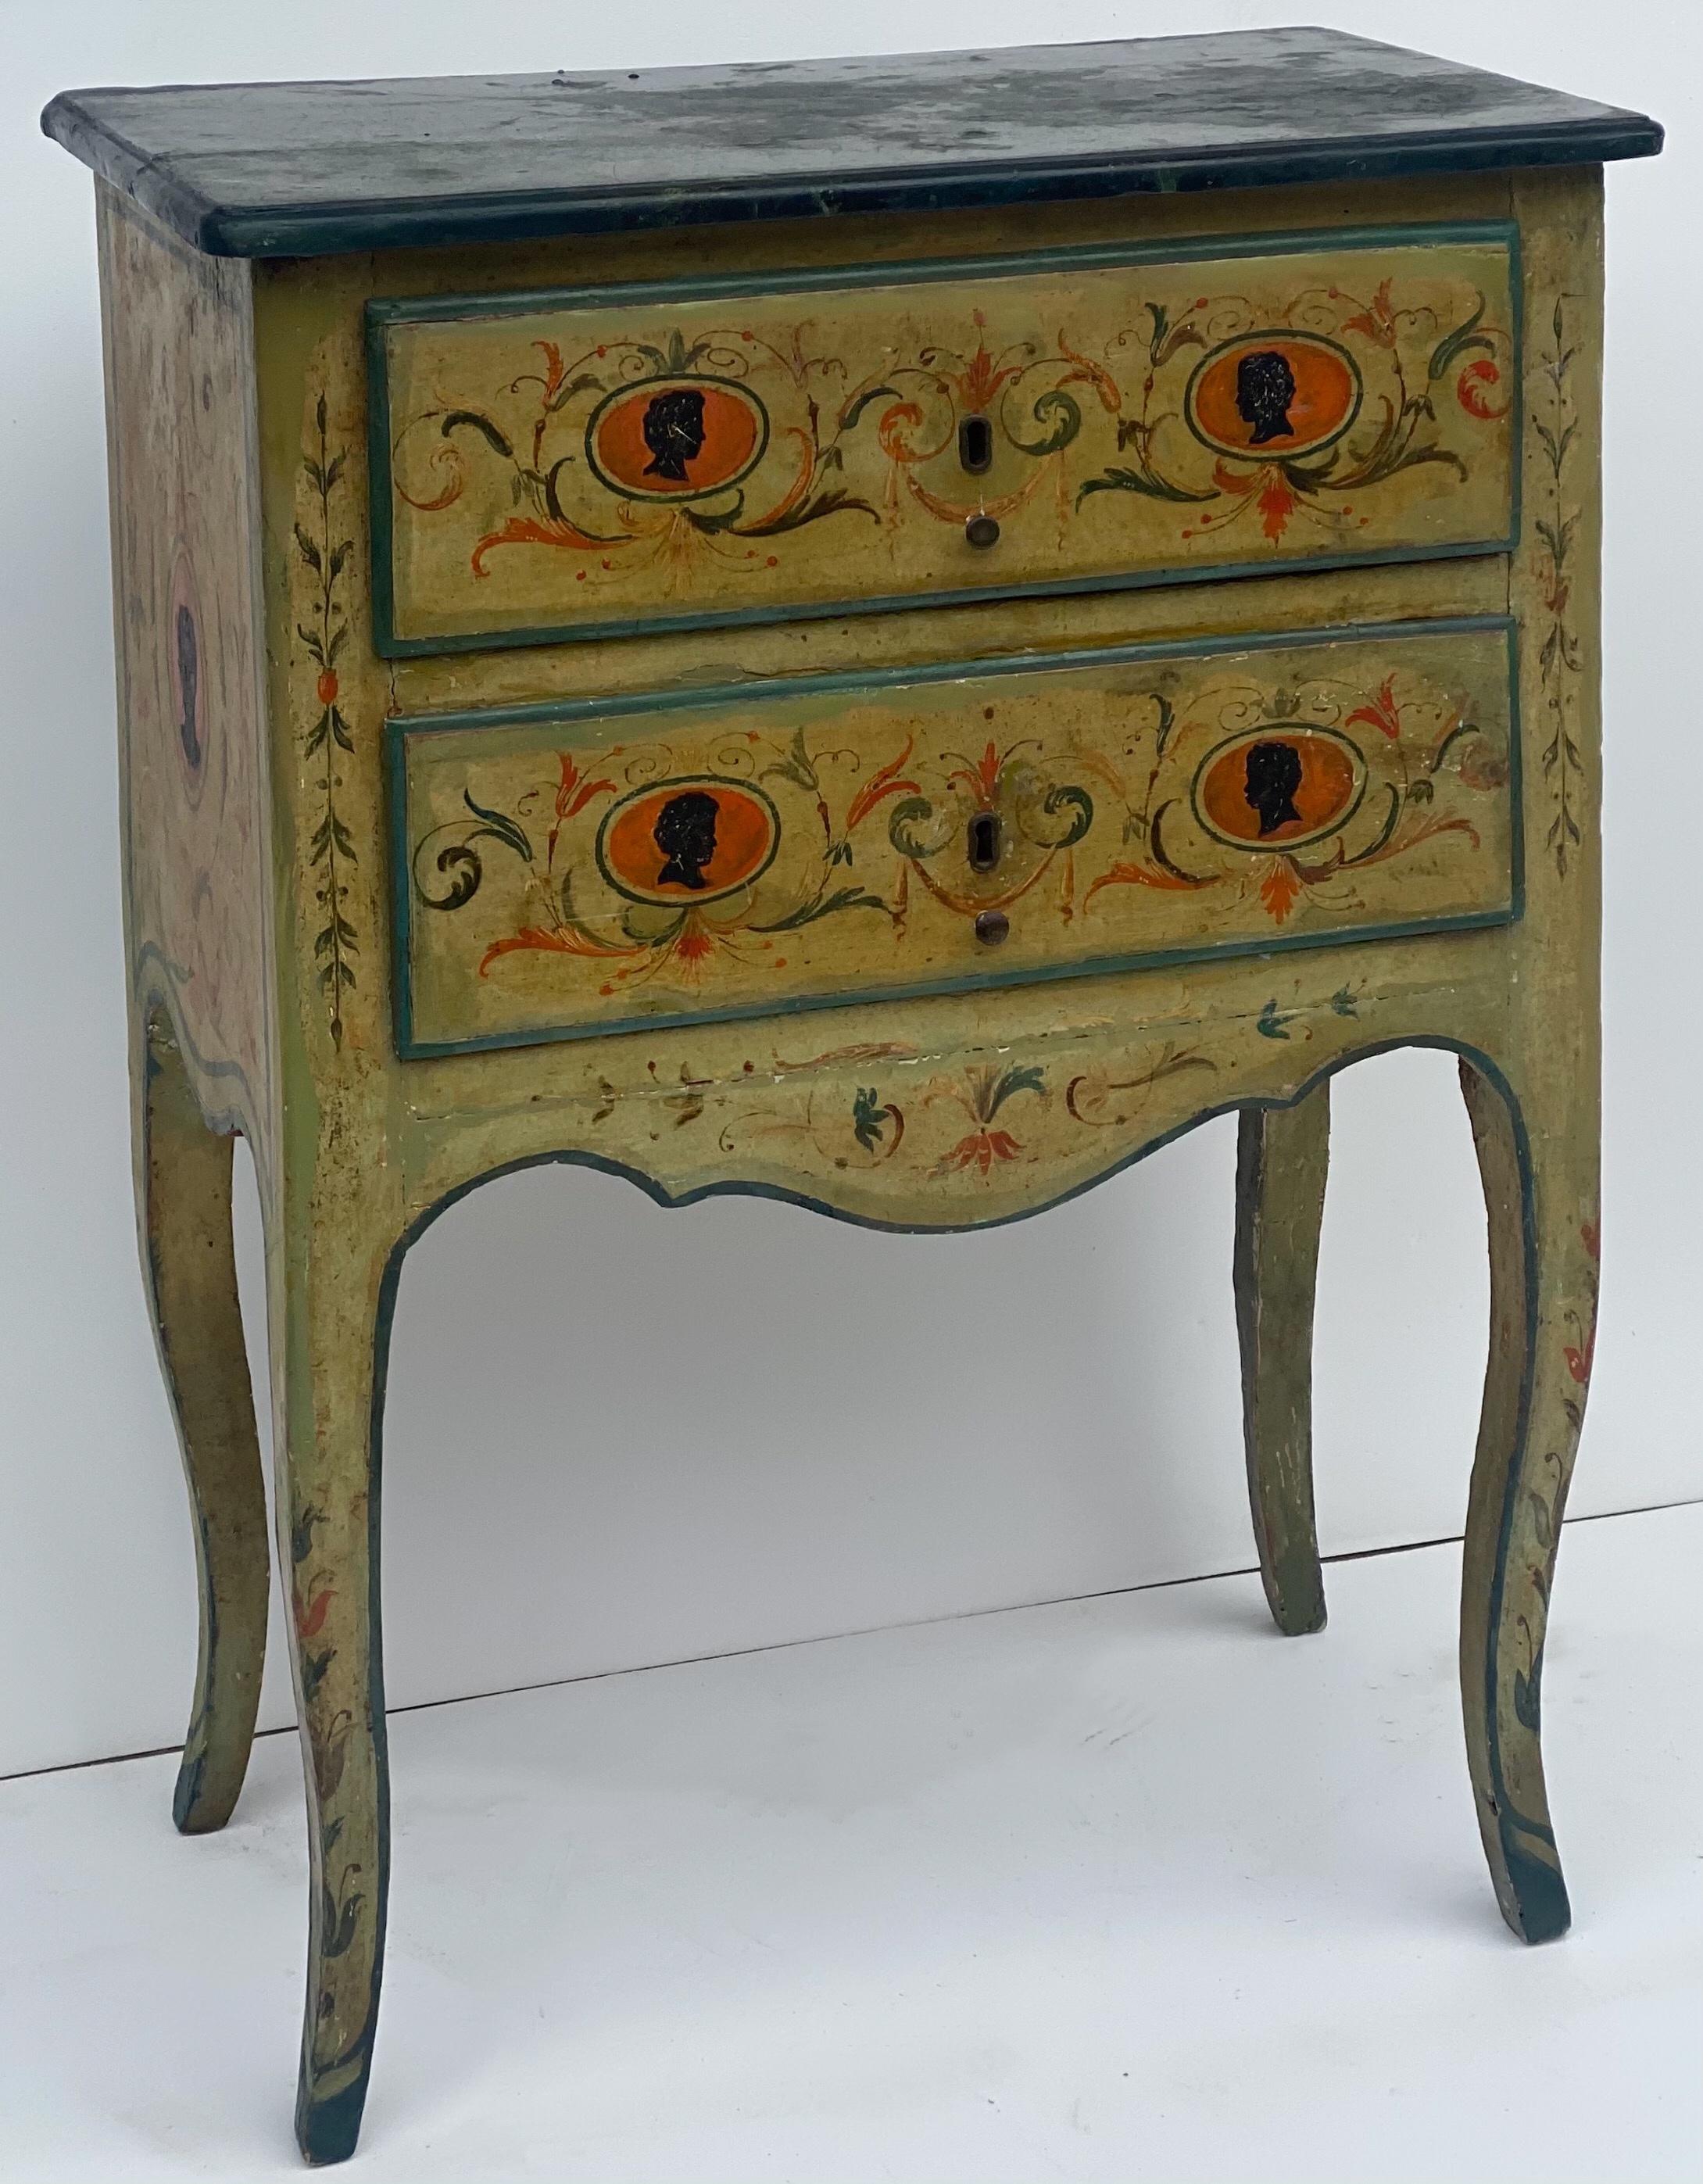 Italian Petite Venetian Neoclassical Style Painted Commode with Faux Marble Top